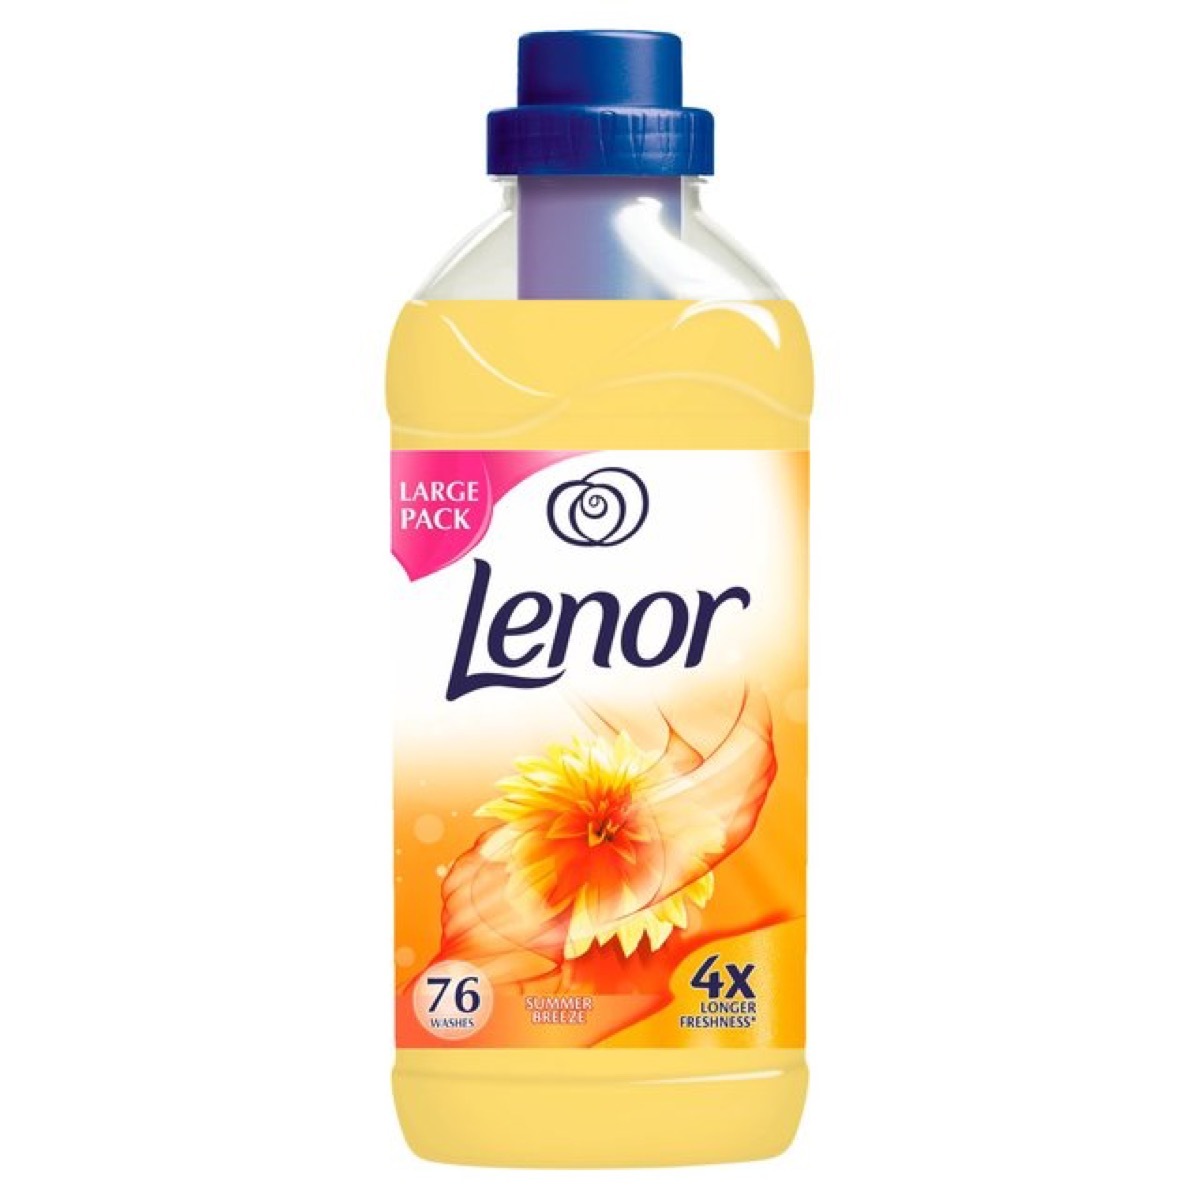 Lenor Laundry Detergent {Brands with Different Names Abroad}